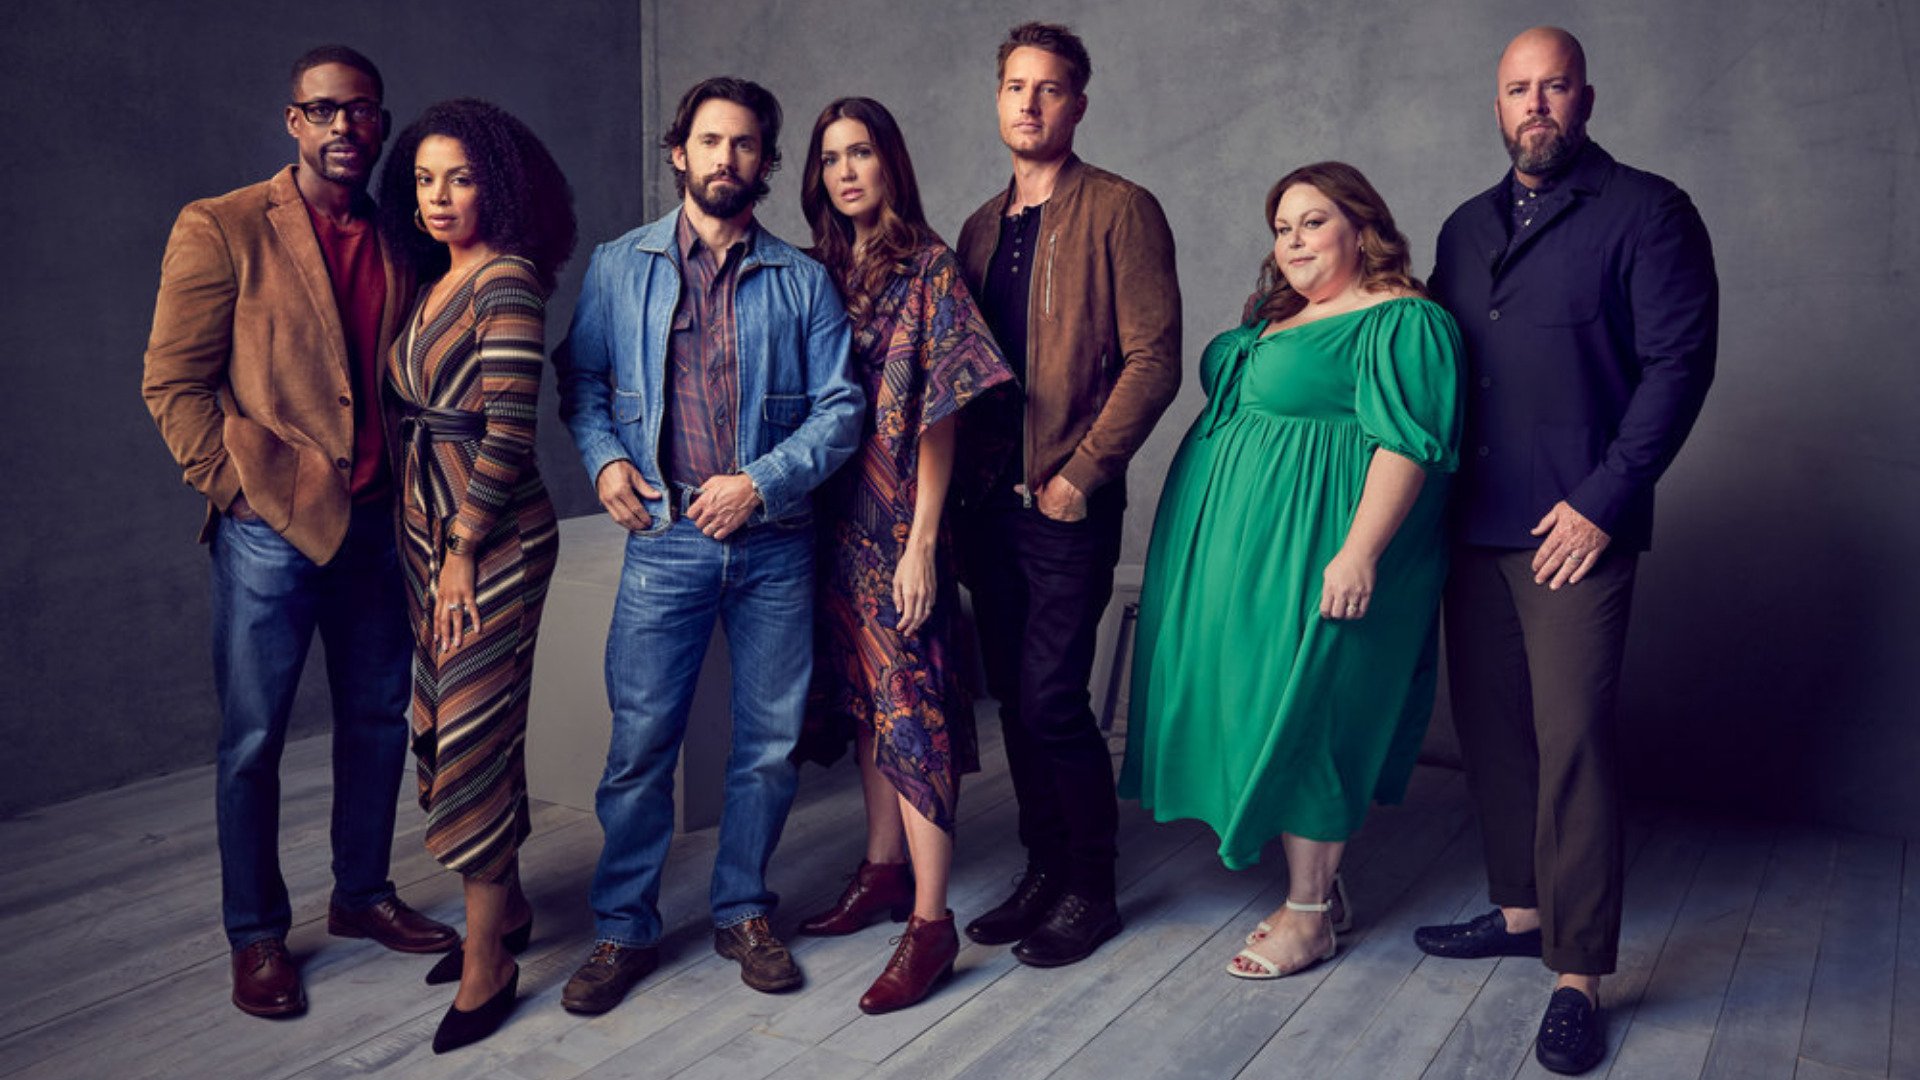 ‘This Is Us’ Cast Shares Early Behind-the-Scenes Photos on Instagram and It Will Break You Thinking About Season 6